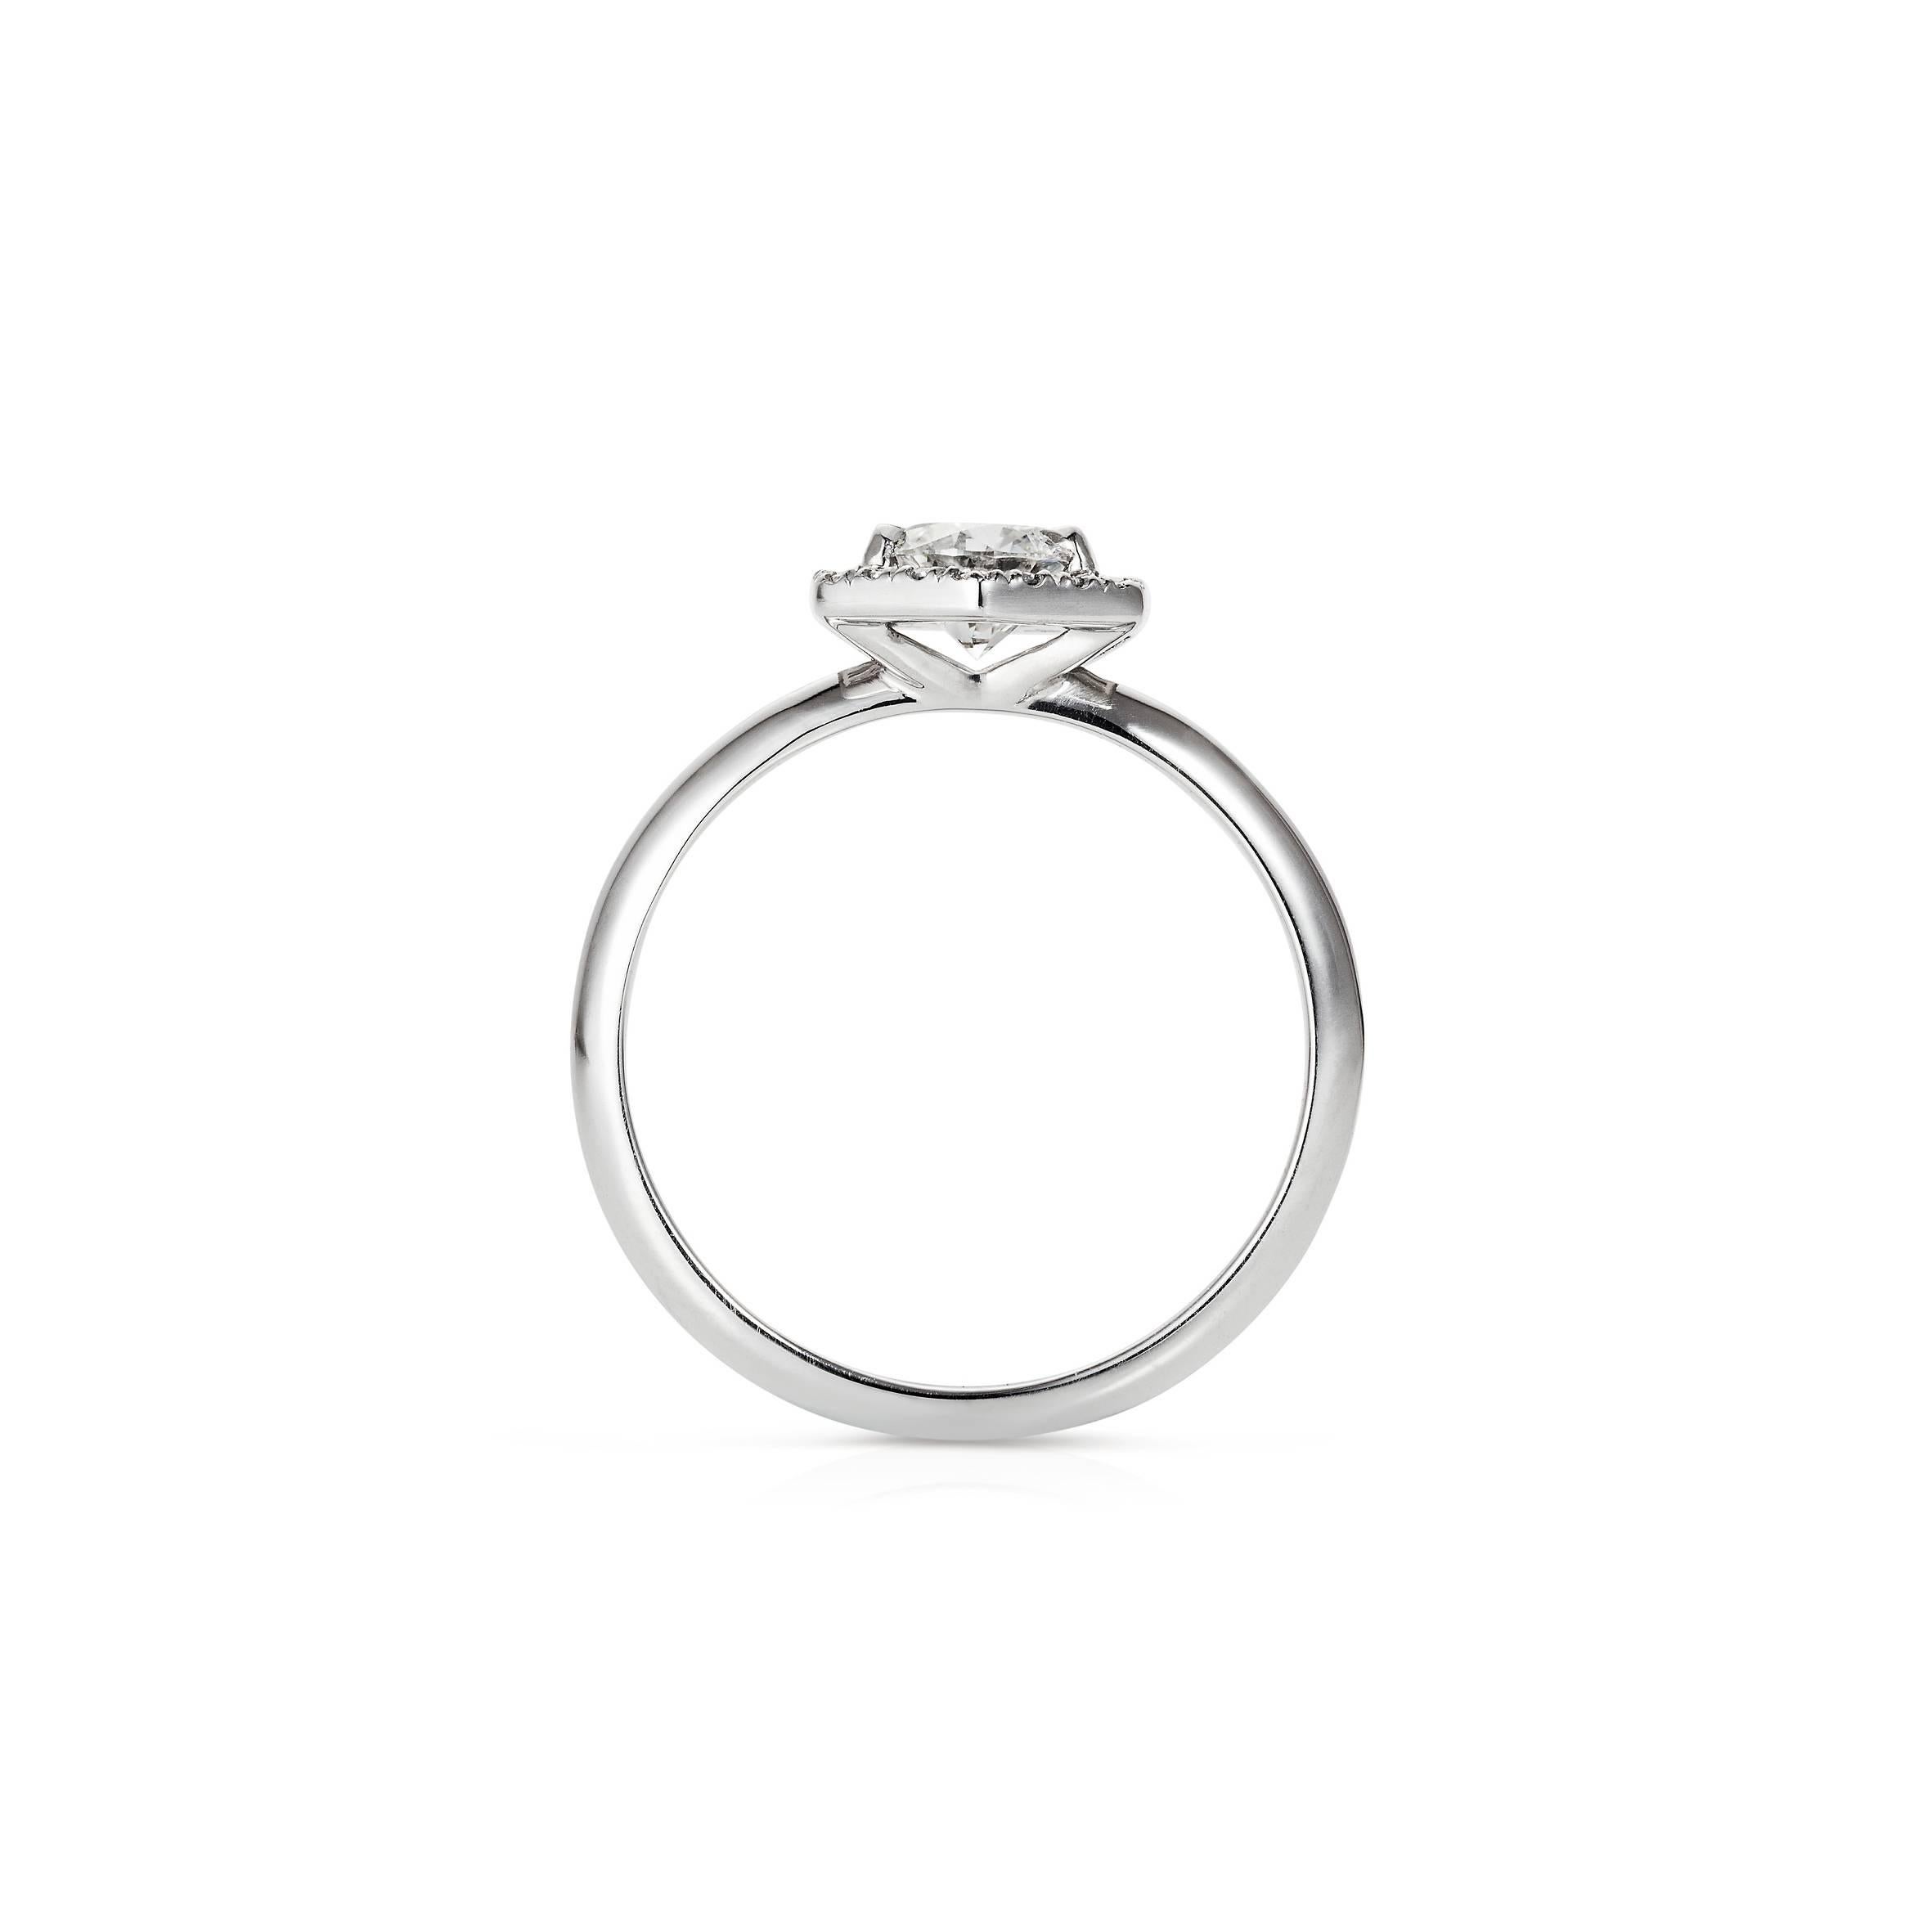 The 'Phoenix' Ring is a unique Engagement Ring designed by Rachel Boston and made in London, England. The central 0.50ct White Diamond has a surrounding microset diamond hexagon halo. The hexagon halo gives the engagement ring a modern sleek look